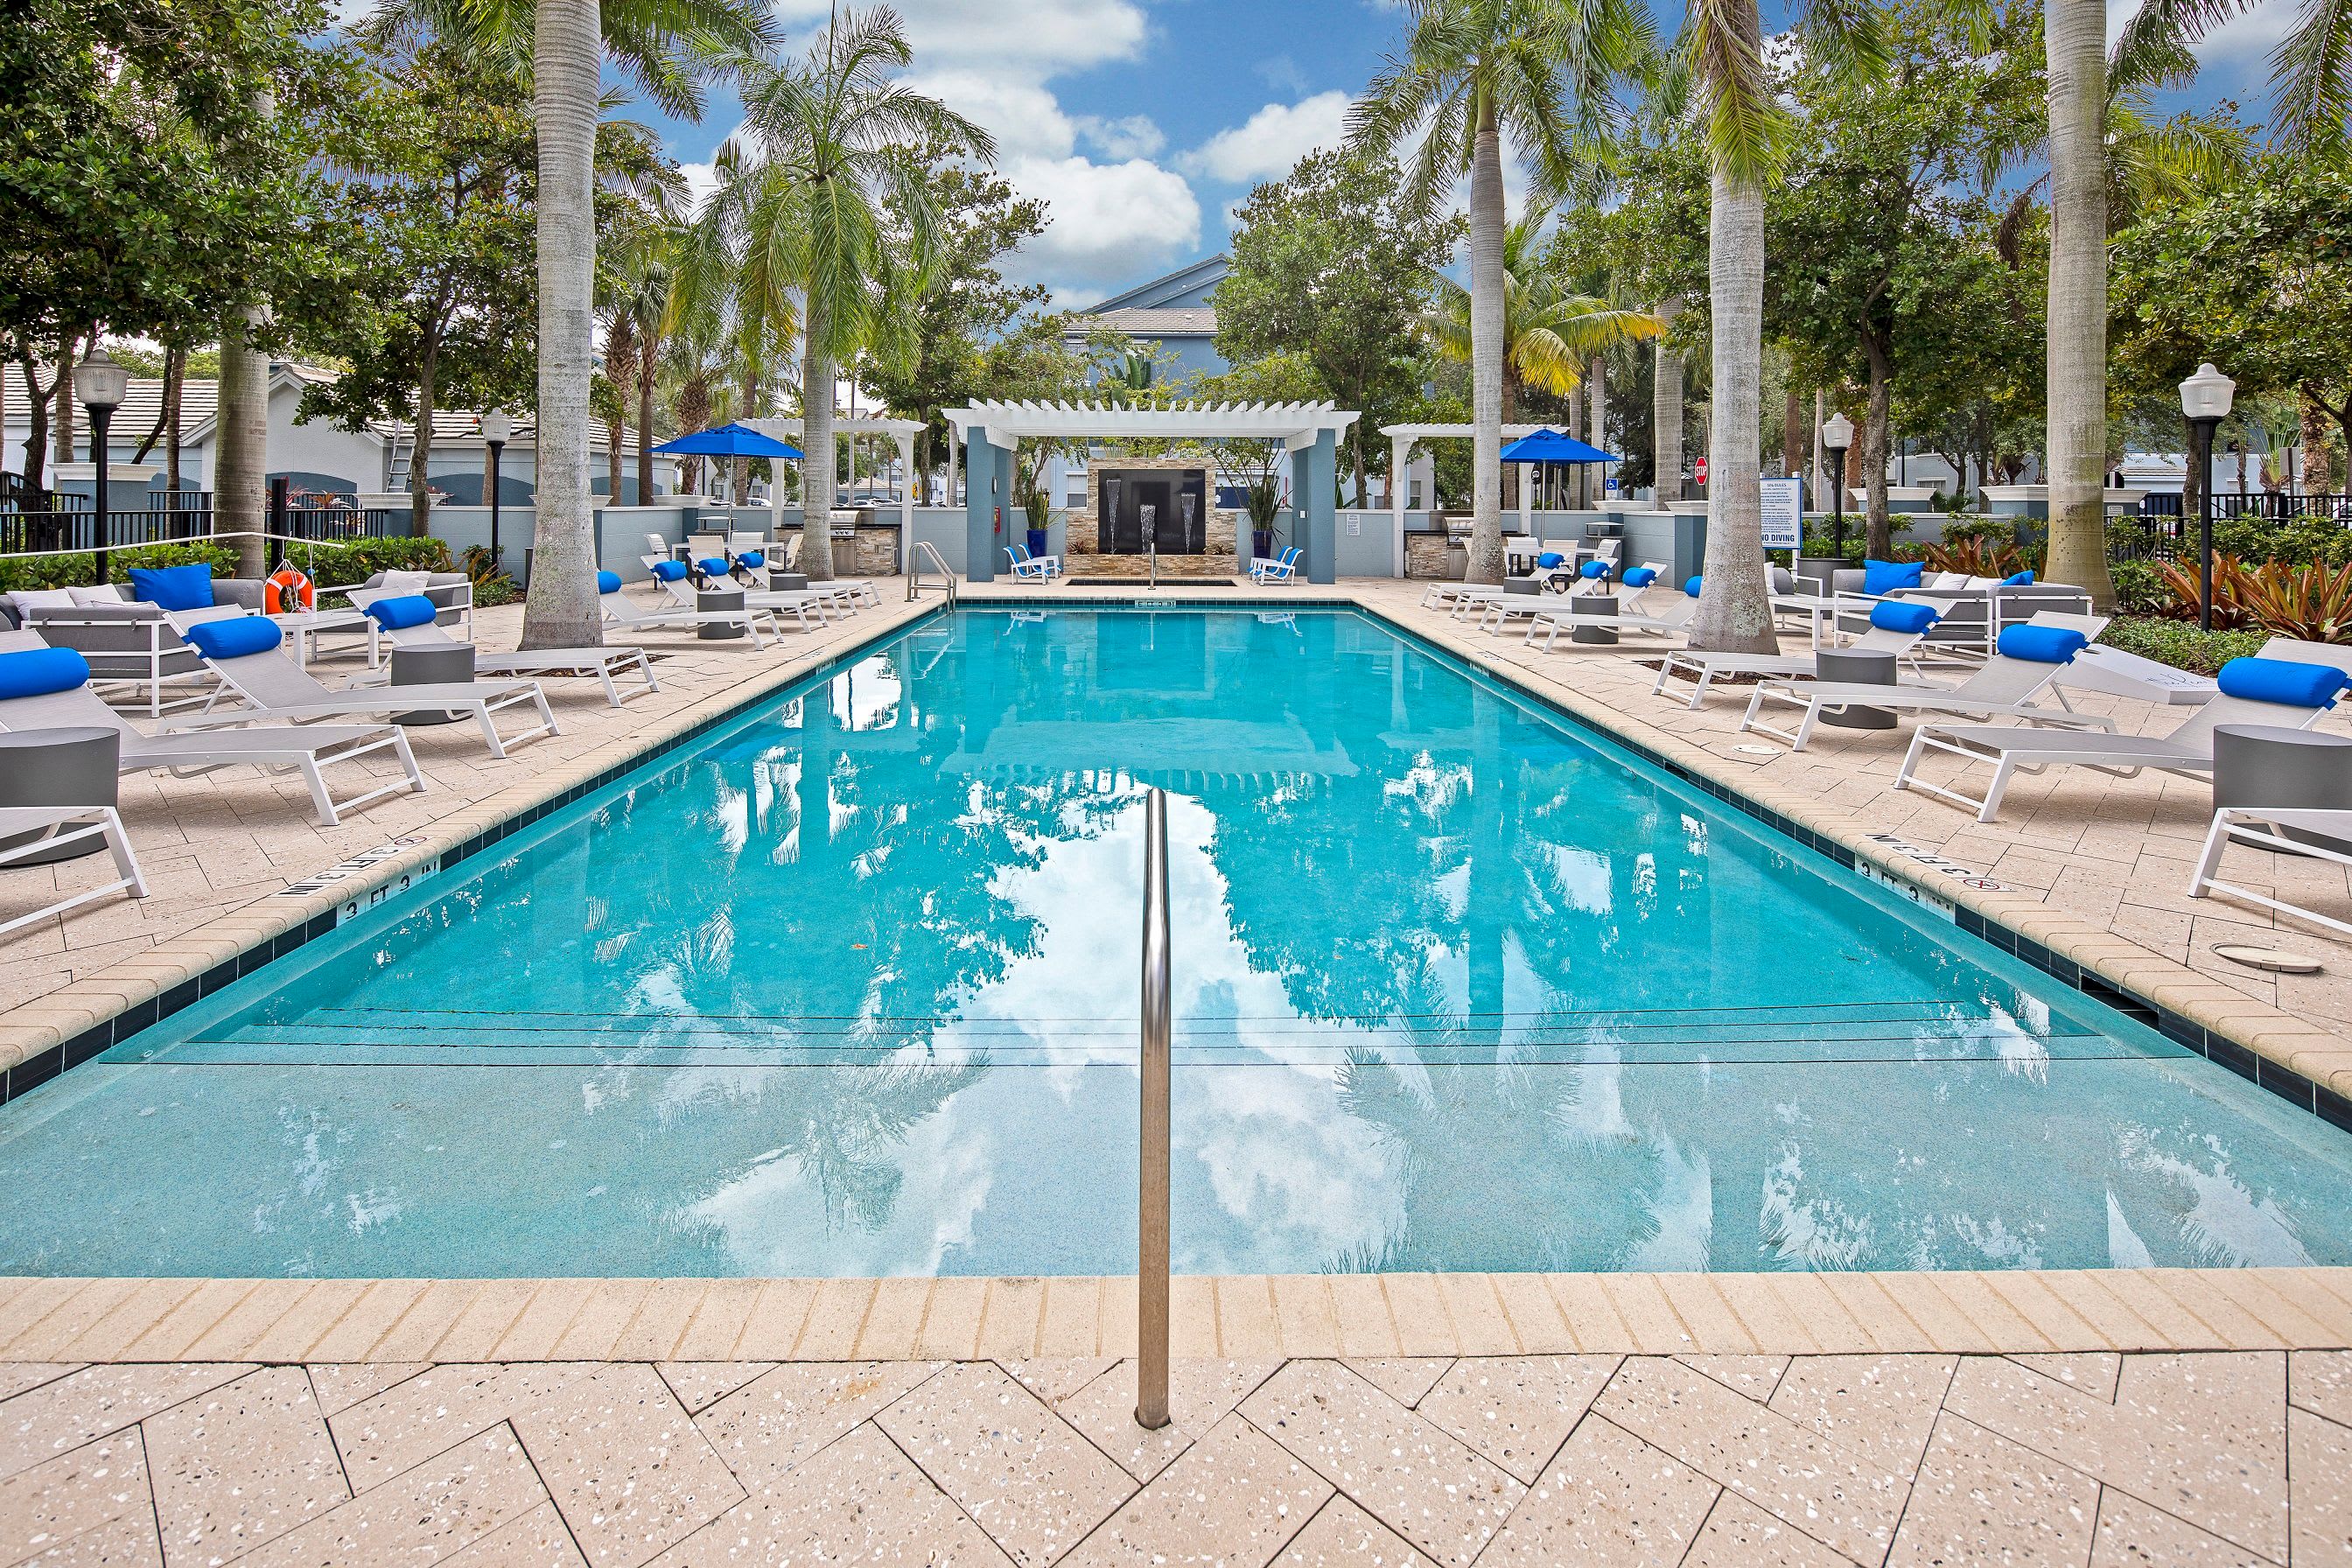 Apply to live at The Pearl in Ft Lauderdale, Florida